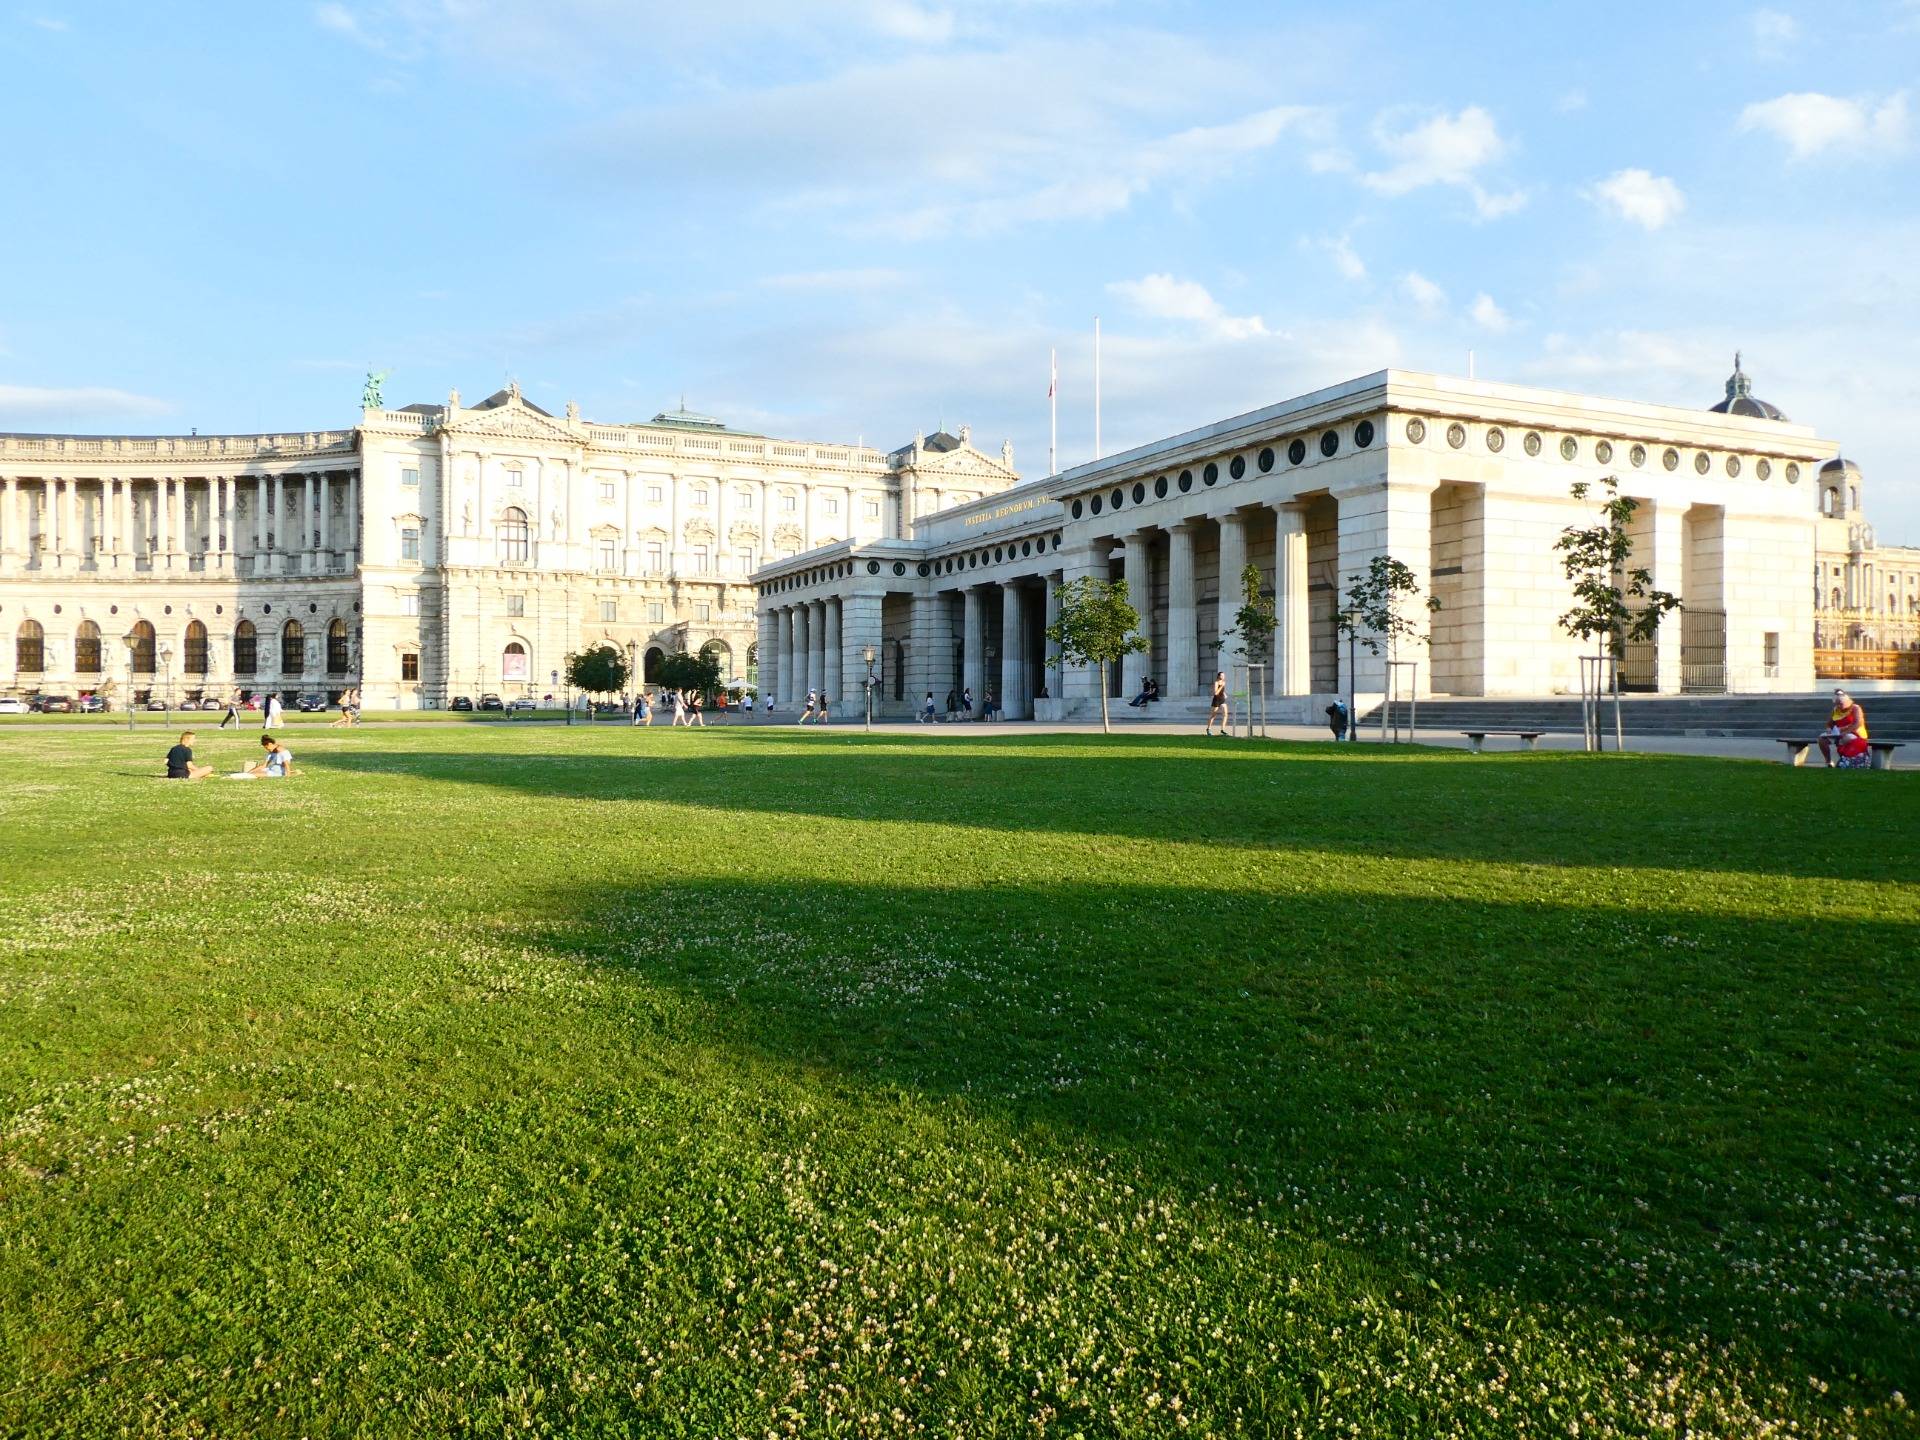 The Hofburg Palace and the People's Garden in Vienna (Austria)